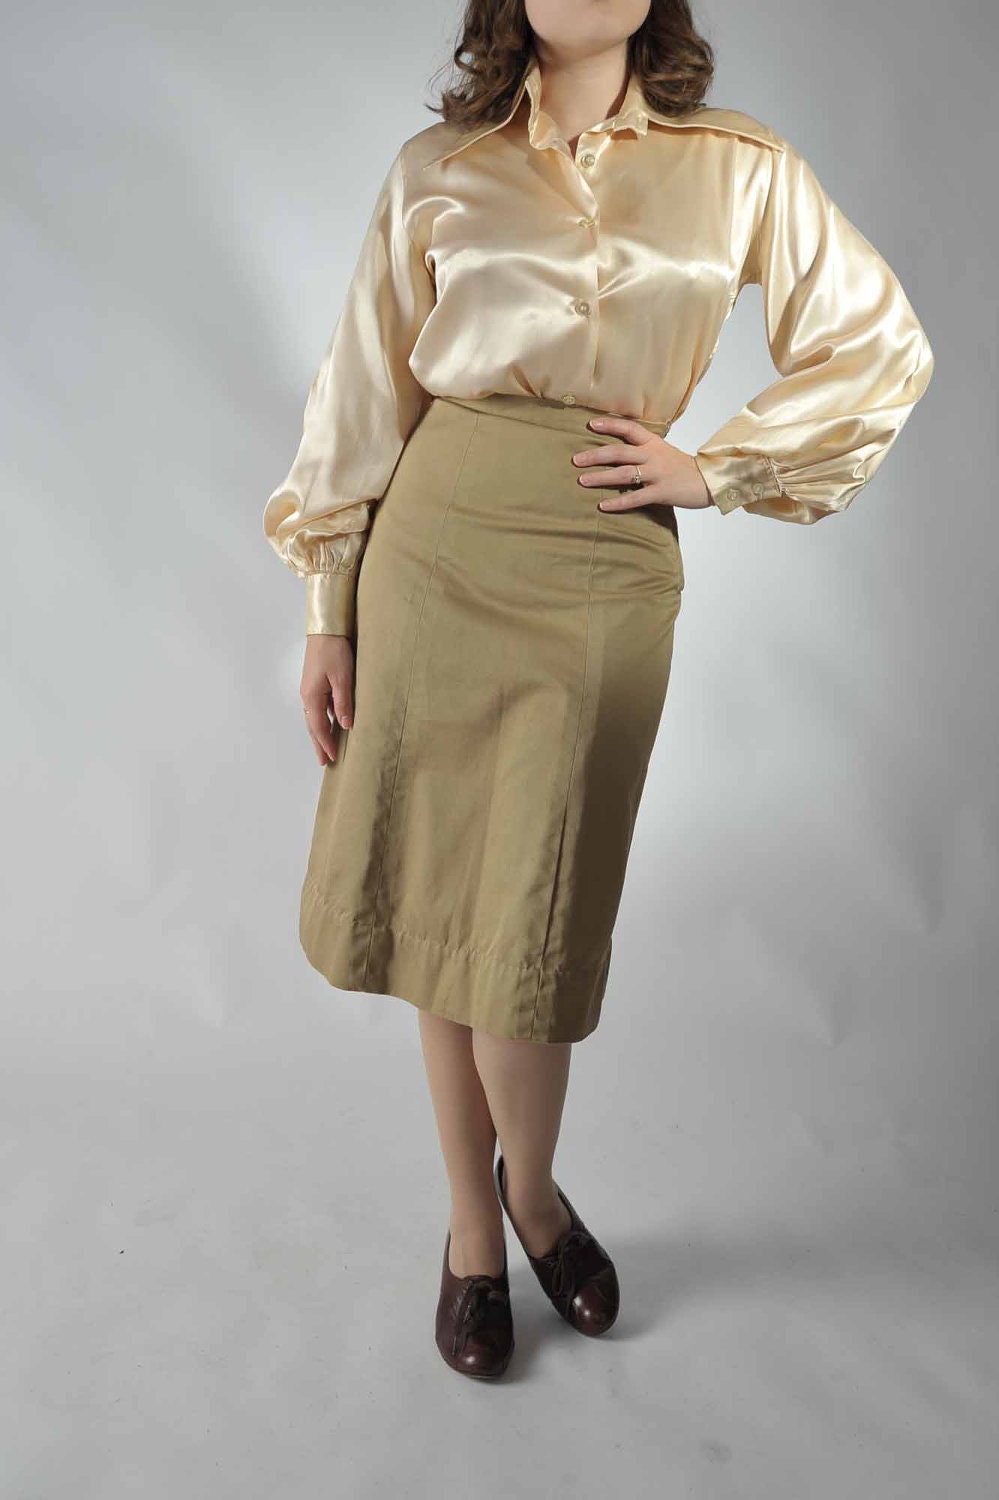 Vintage 1940s WWII WAC Skirt // The Enlisted Gal Khaki Uniform